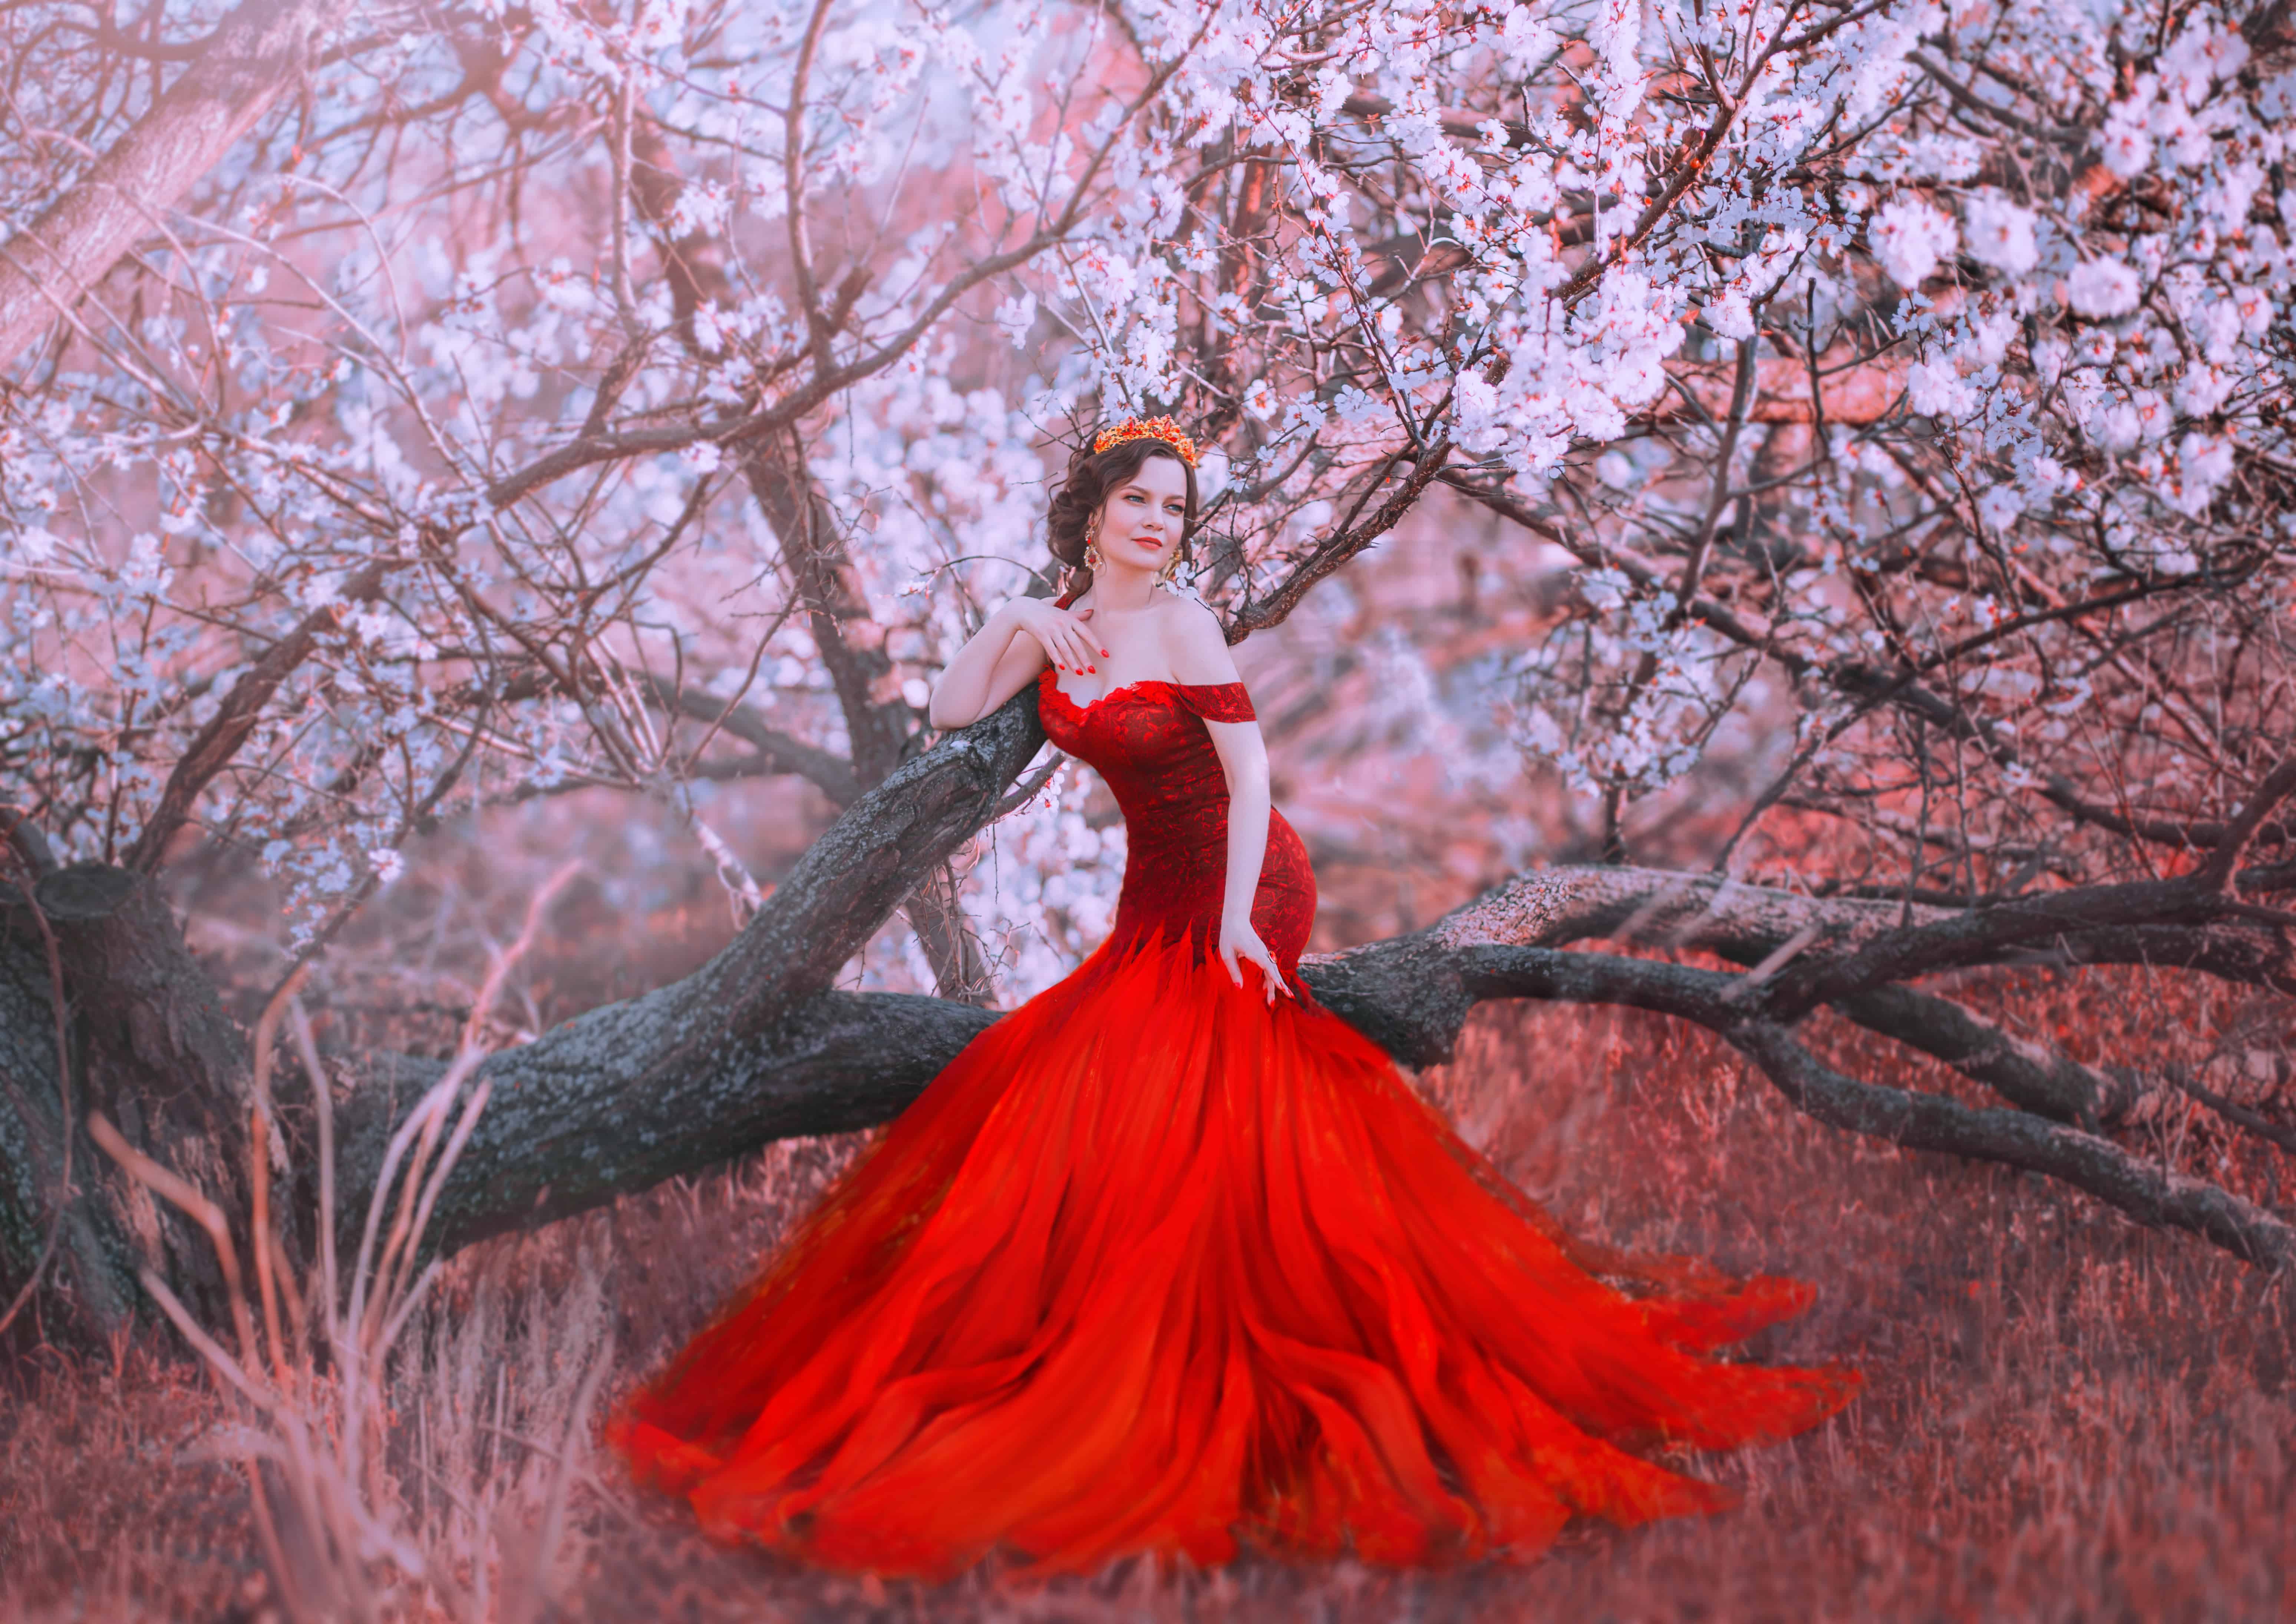 charming nymph sits on fallen tree in spring forest, lady in gorgeous red scarlet long dress with bare shoulders, mermaid becomes human , fairy-tale princess walks in sakura garden, creative colors